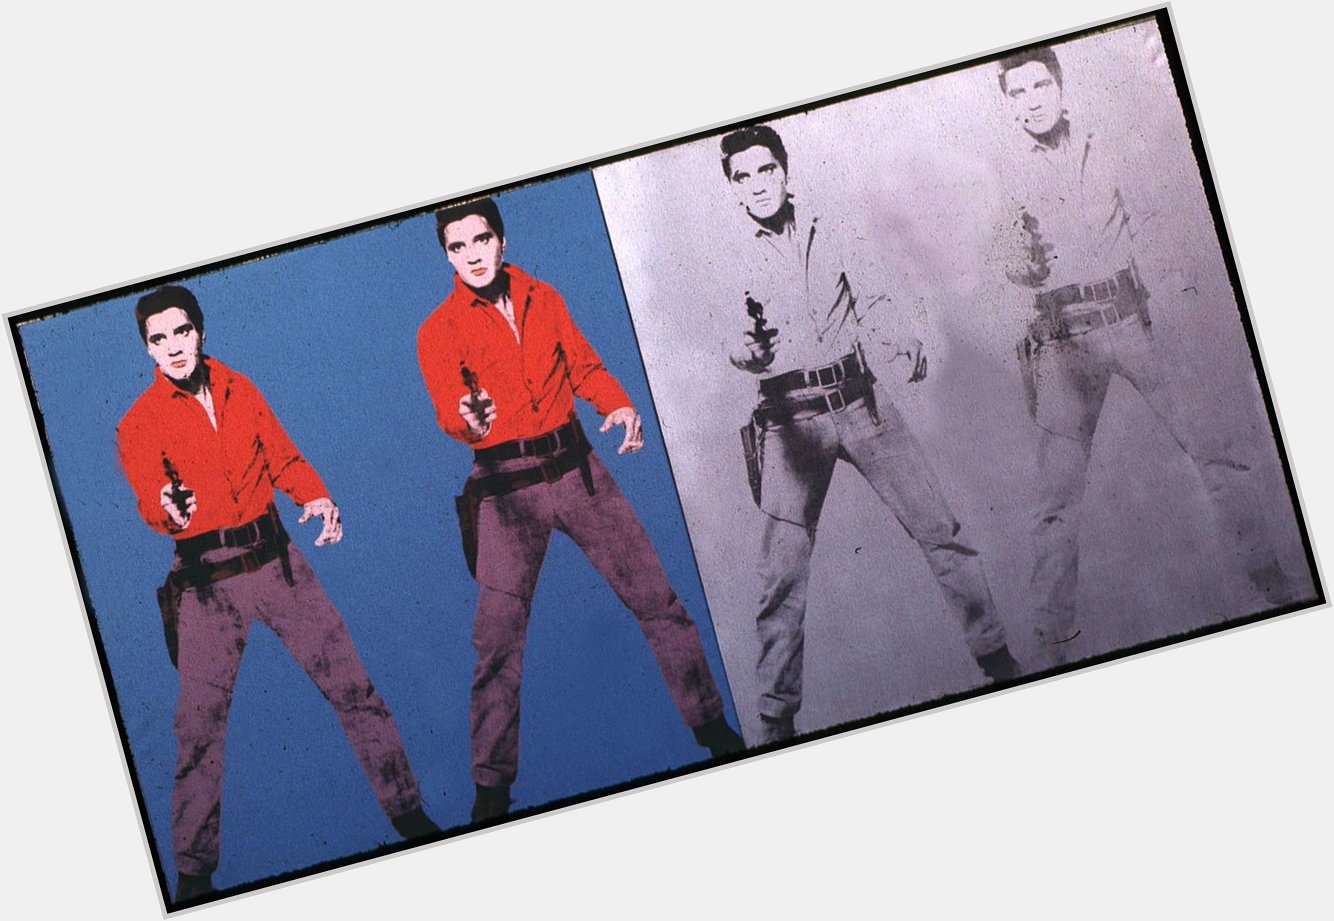 Happy Birthday to Presley, he would have turned 80 today Andy Warhol\s Elvis I & II, 1963 